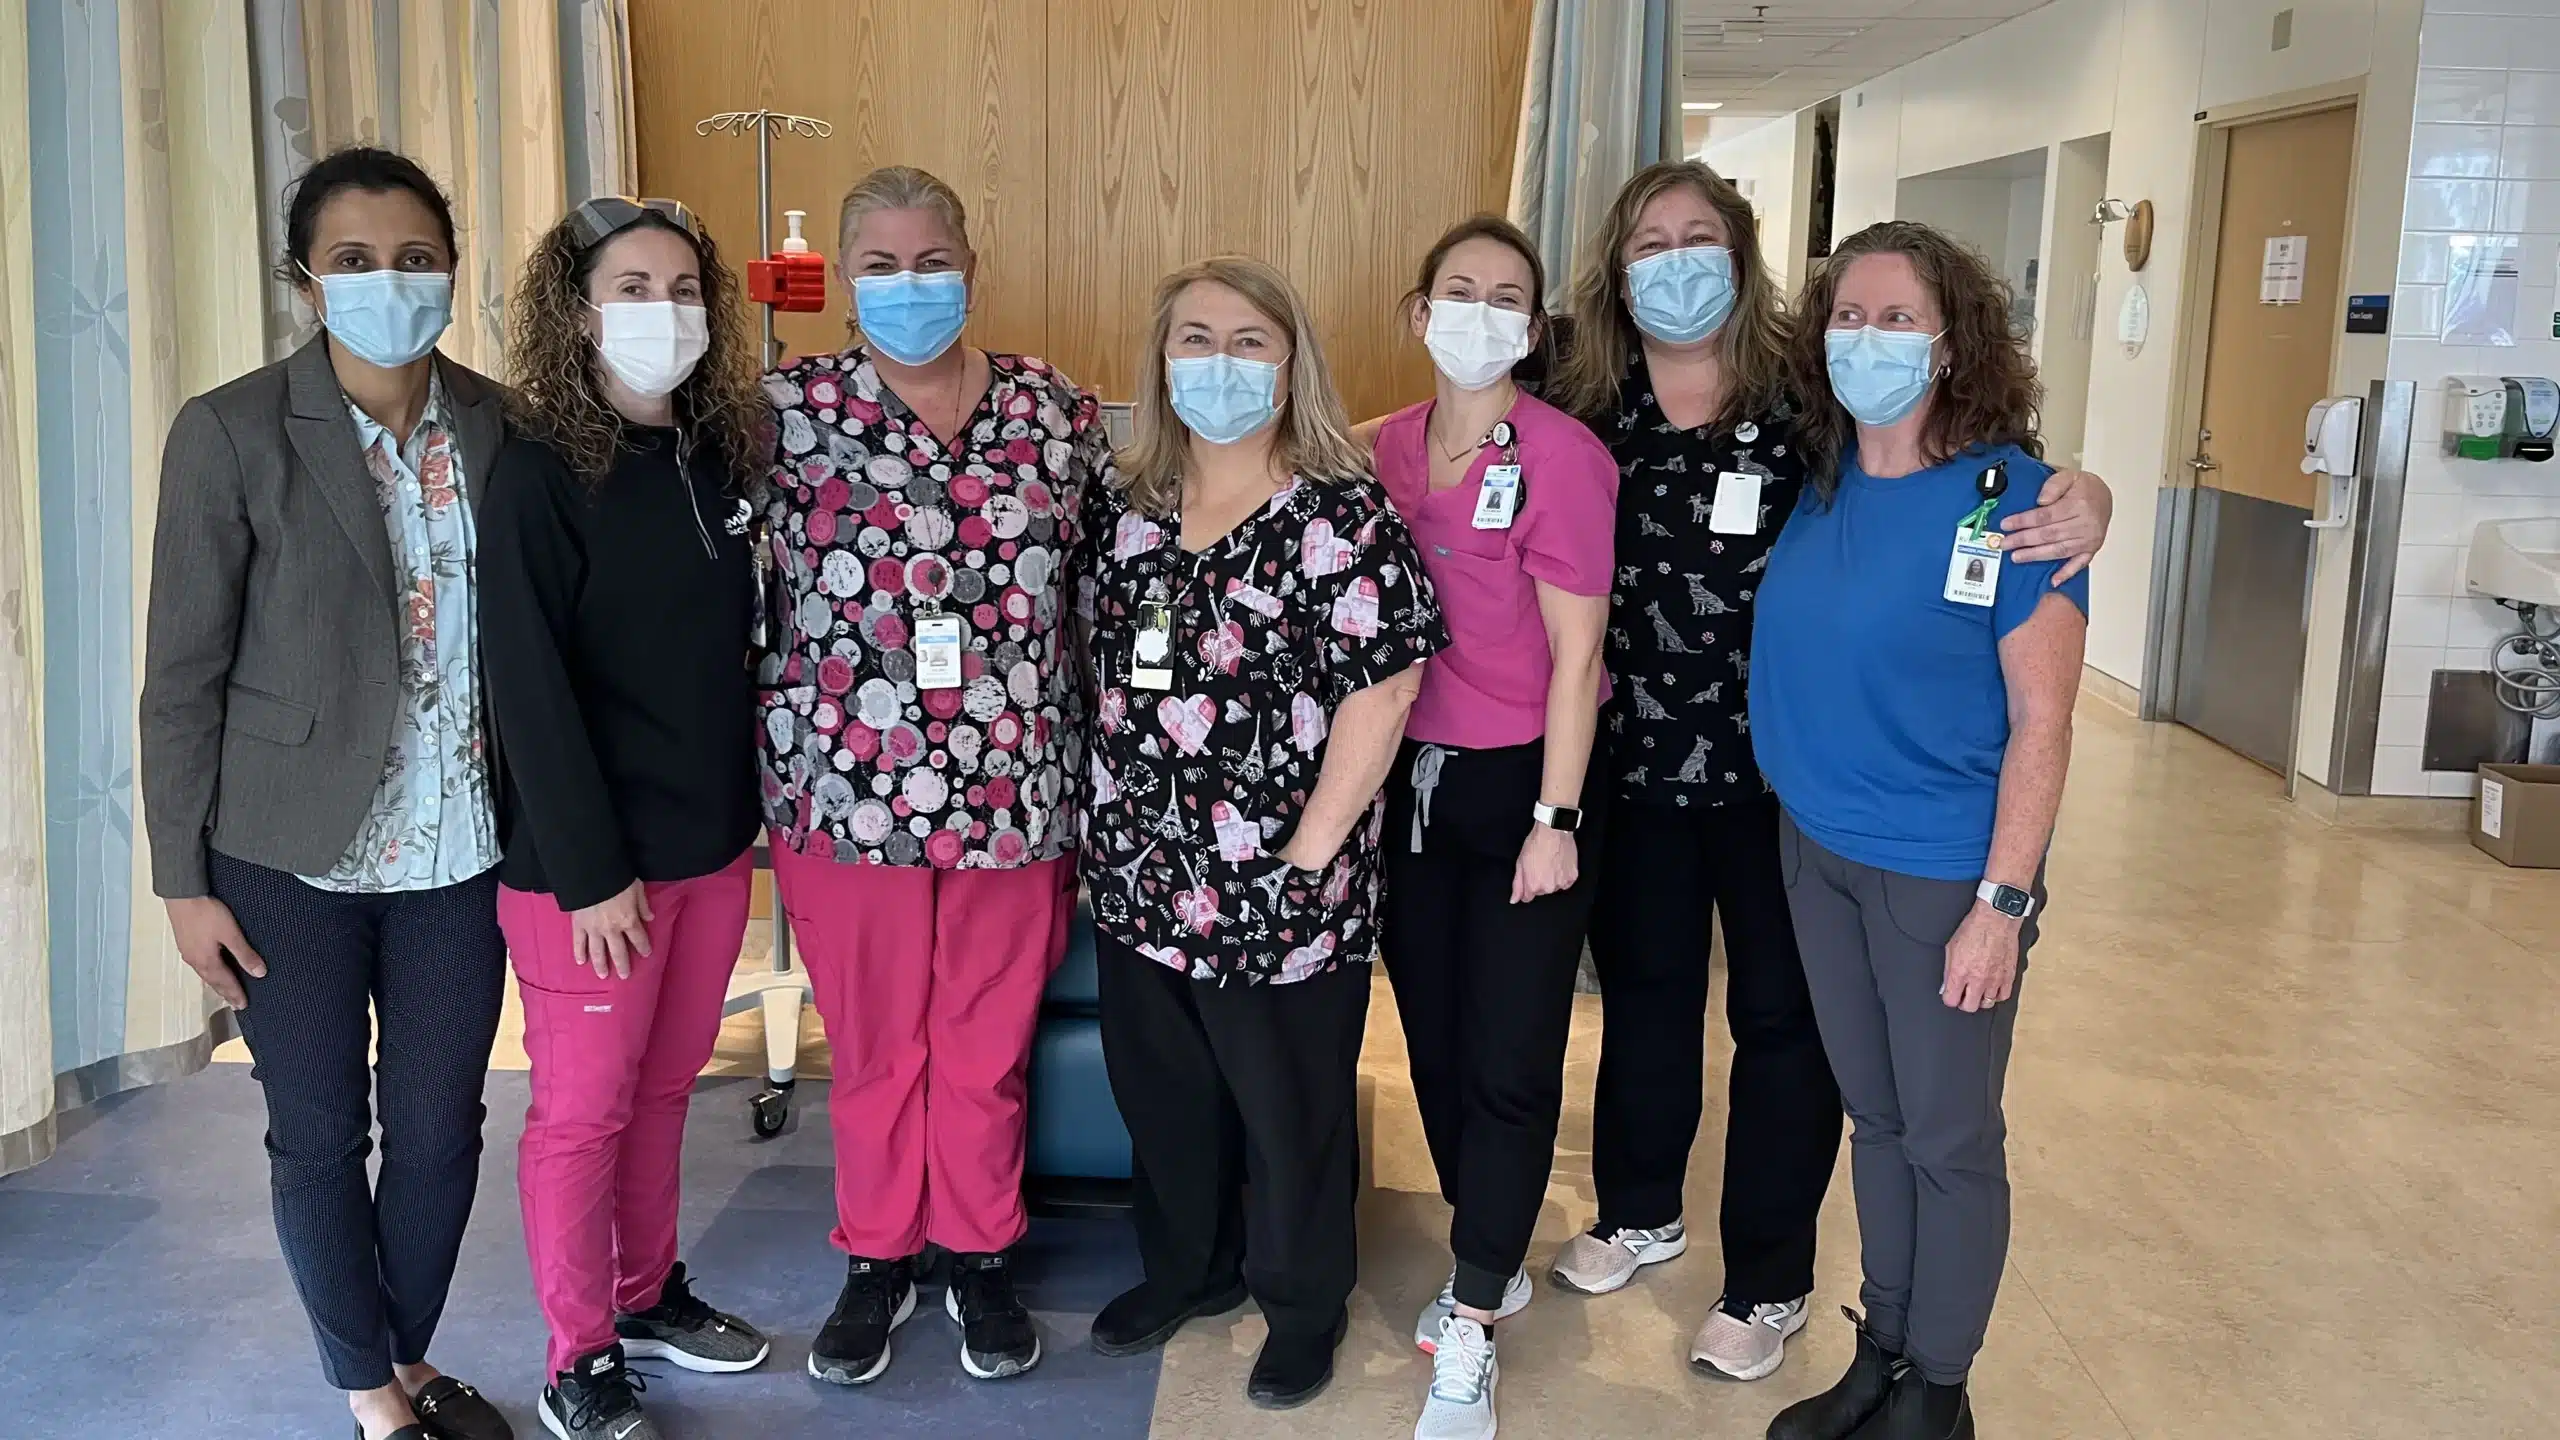 Jolene Bell a nurse at the Simcoe Muskoka Regional Cancer Centre, poses with her colleagues in the cancer centre for a photo
